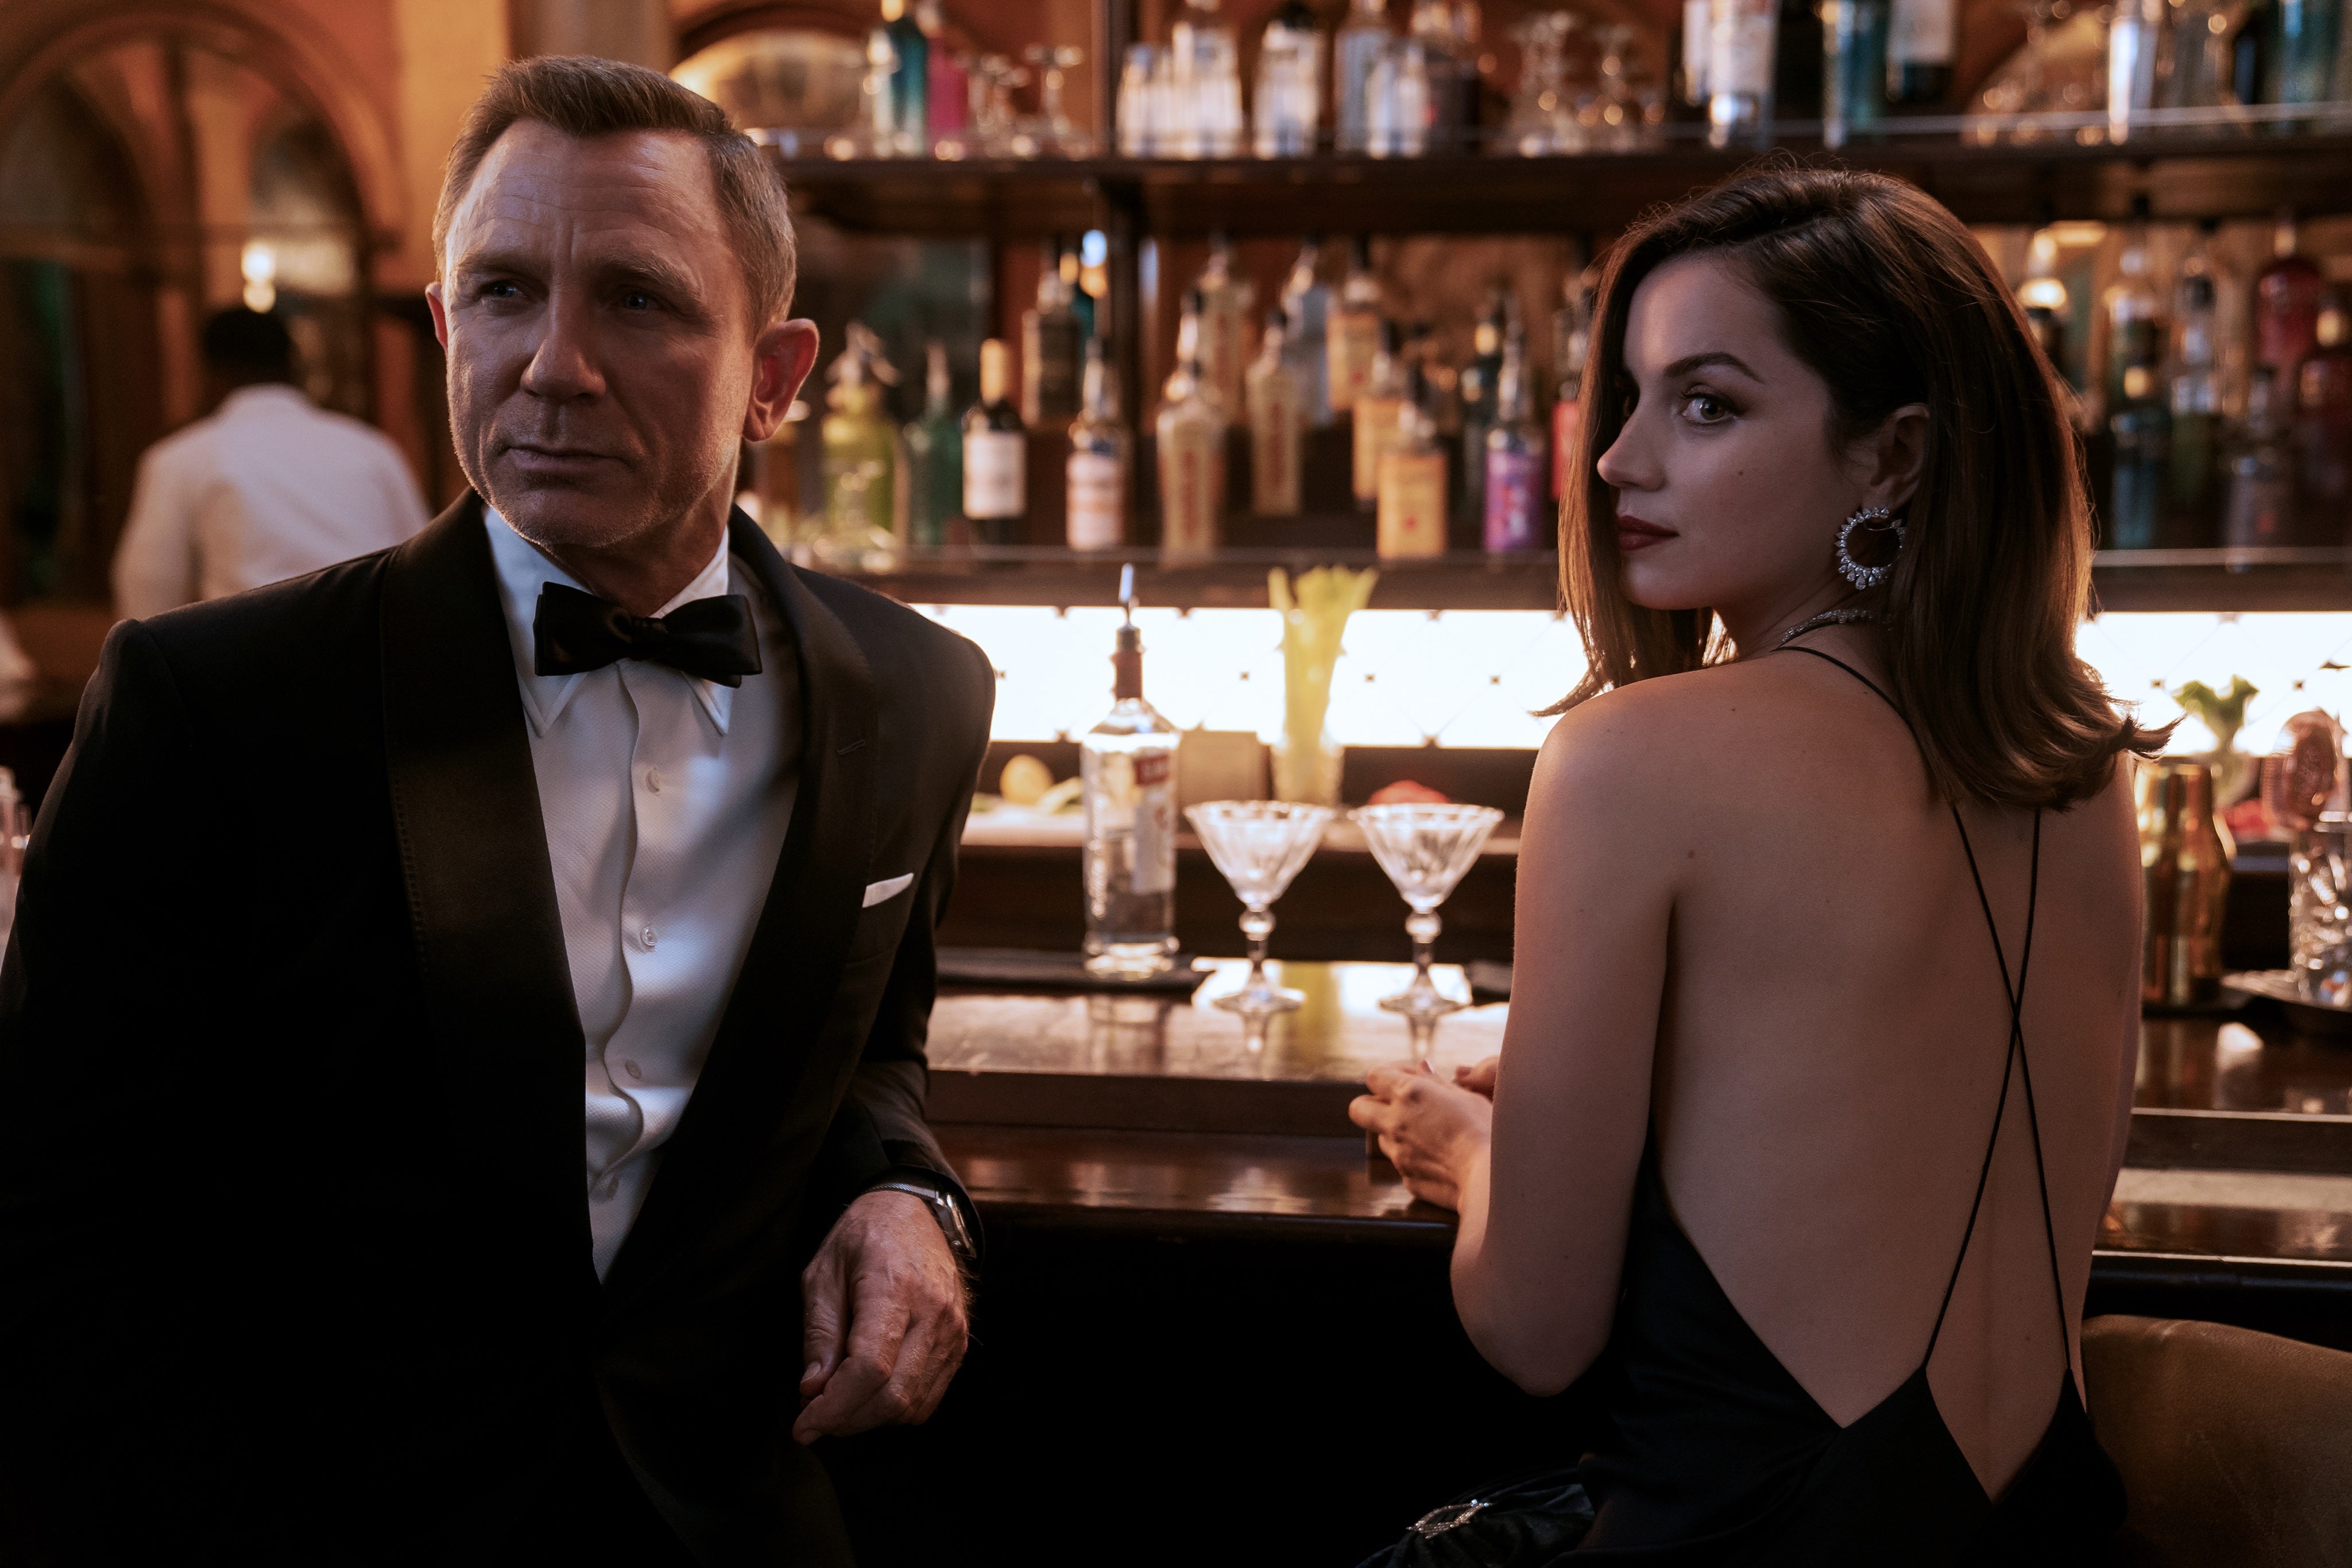 On the left, a blond man wears a tuxedo and looks to his right. He leans on a bar. Next to him is a woman with long brown hair and a strappy black dress, who holds a glass and sits at the bar. She looks in the same direction. 